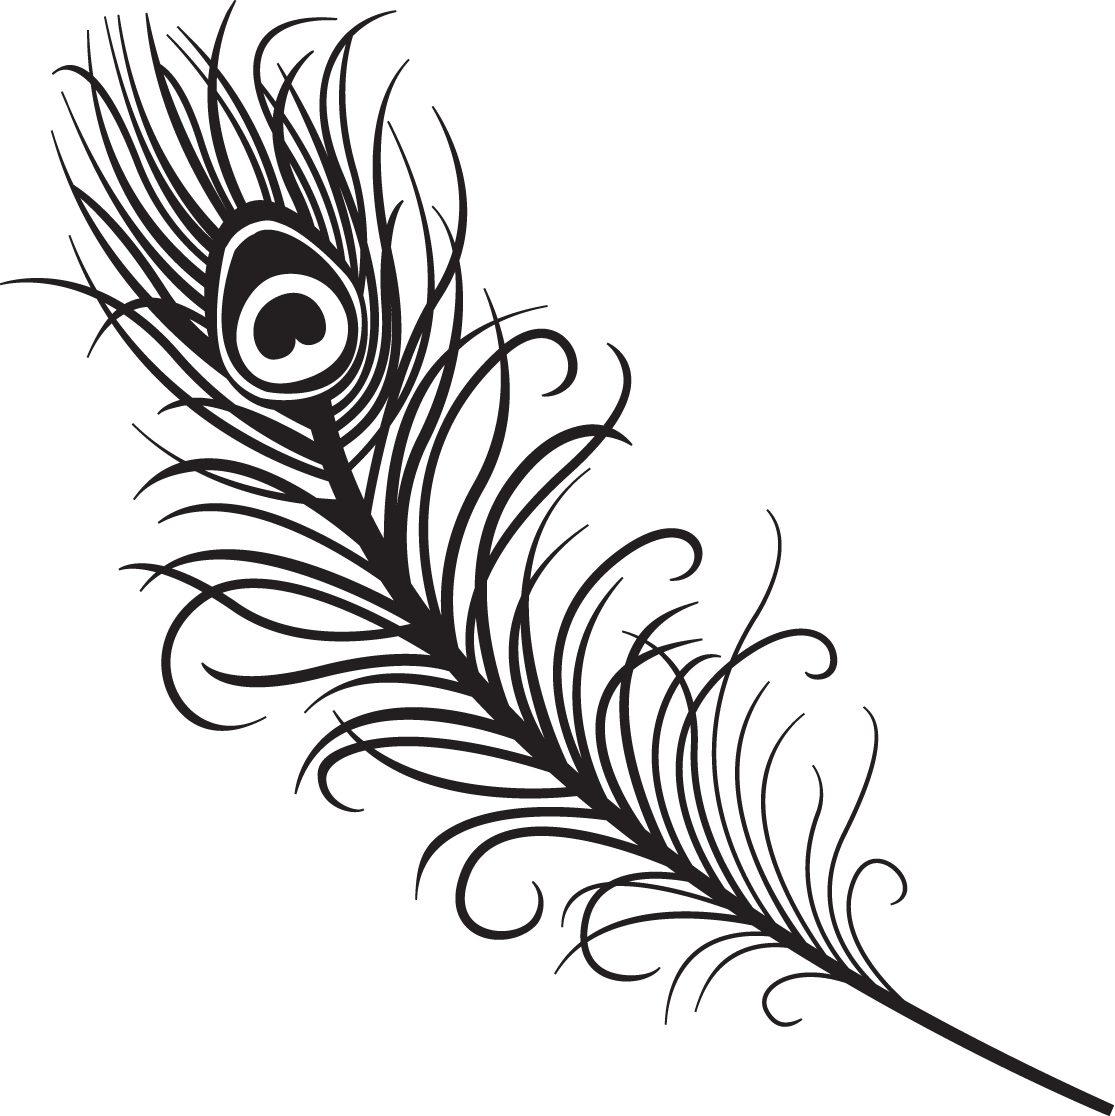 Head clipart peacock. Feather black and white